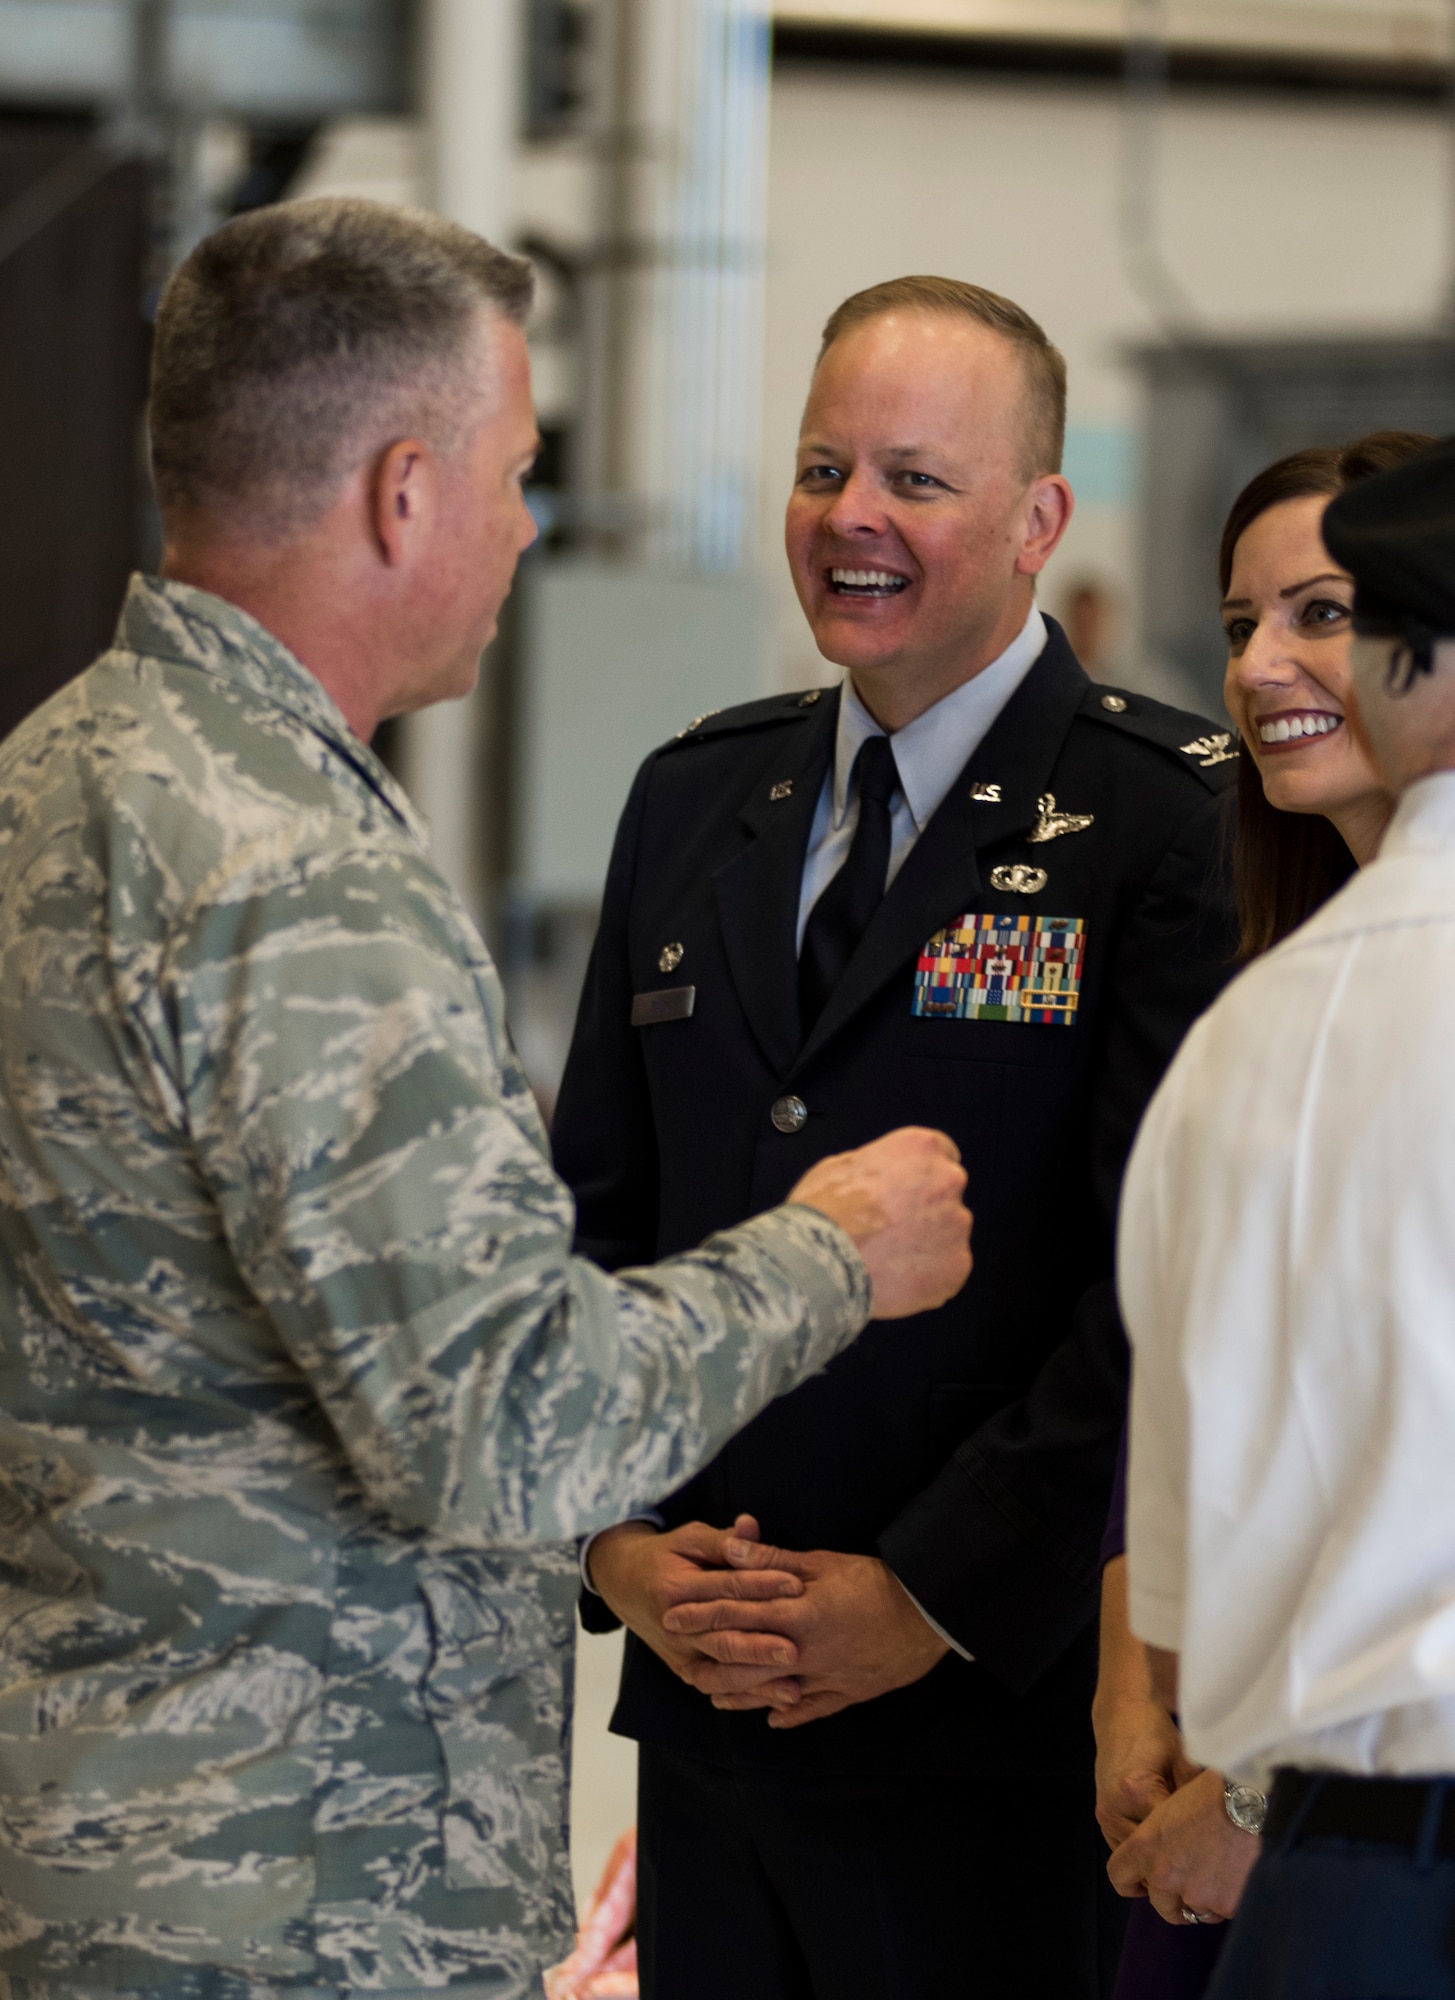 Col. Derek Salmi, 92nd Air Refueling Wing commander, and his wife speak with Brig. Gen. Jeremy Horn, Washington Air National Guard commander, during an assumption of command ceremony June 15, 2018, at Fairchild Air Force Base, Wash. The 92d ARW operates 35 KC-135 R/T Stratotanker aircraft manned by 58 aircrews to support worldwide military missions. (U.S. Air Force photo/ Senior Airman Sean Campbell)